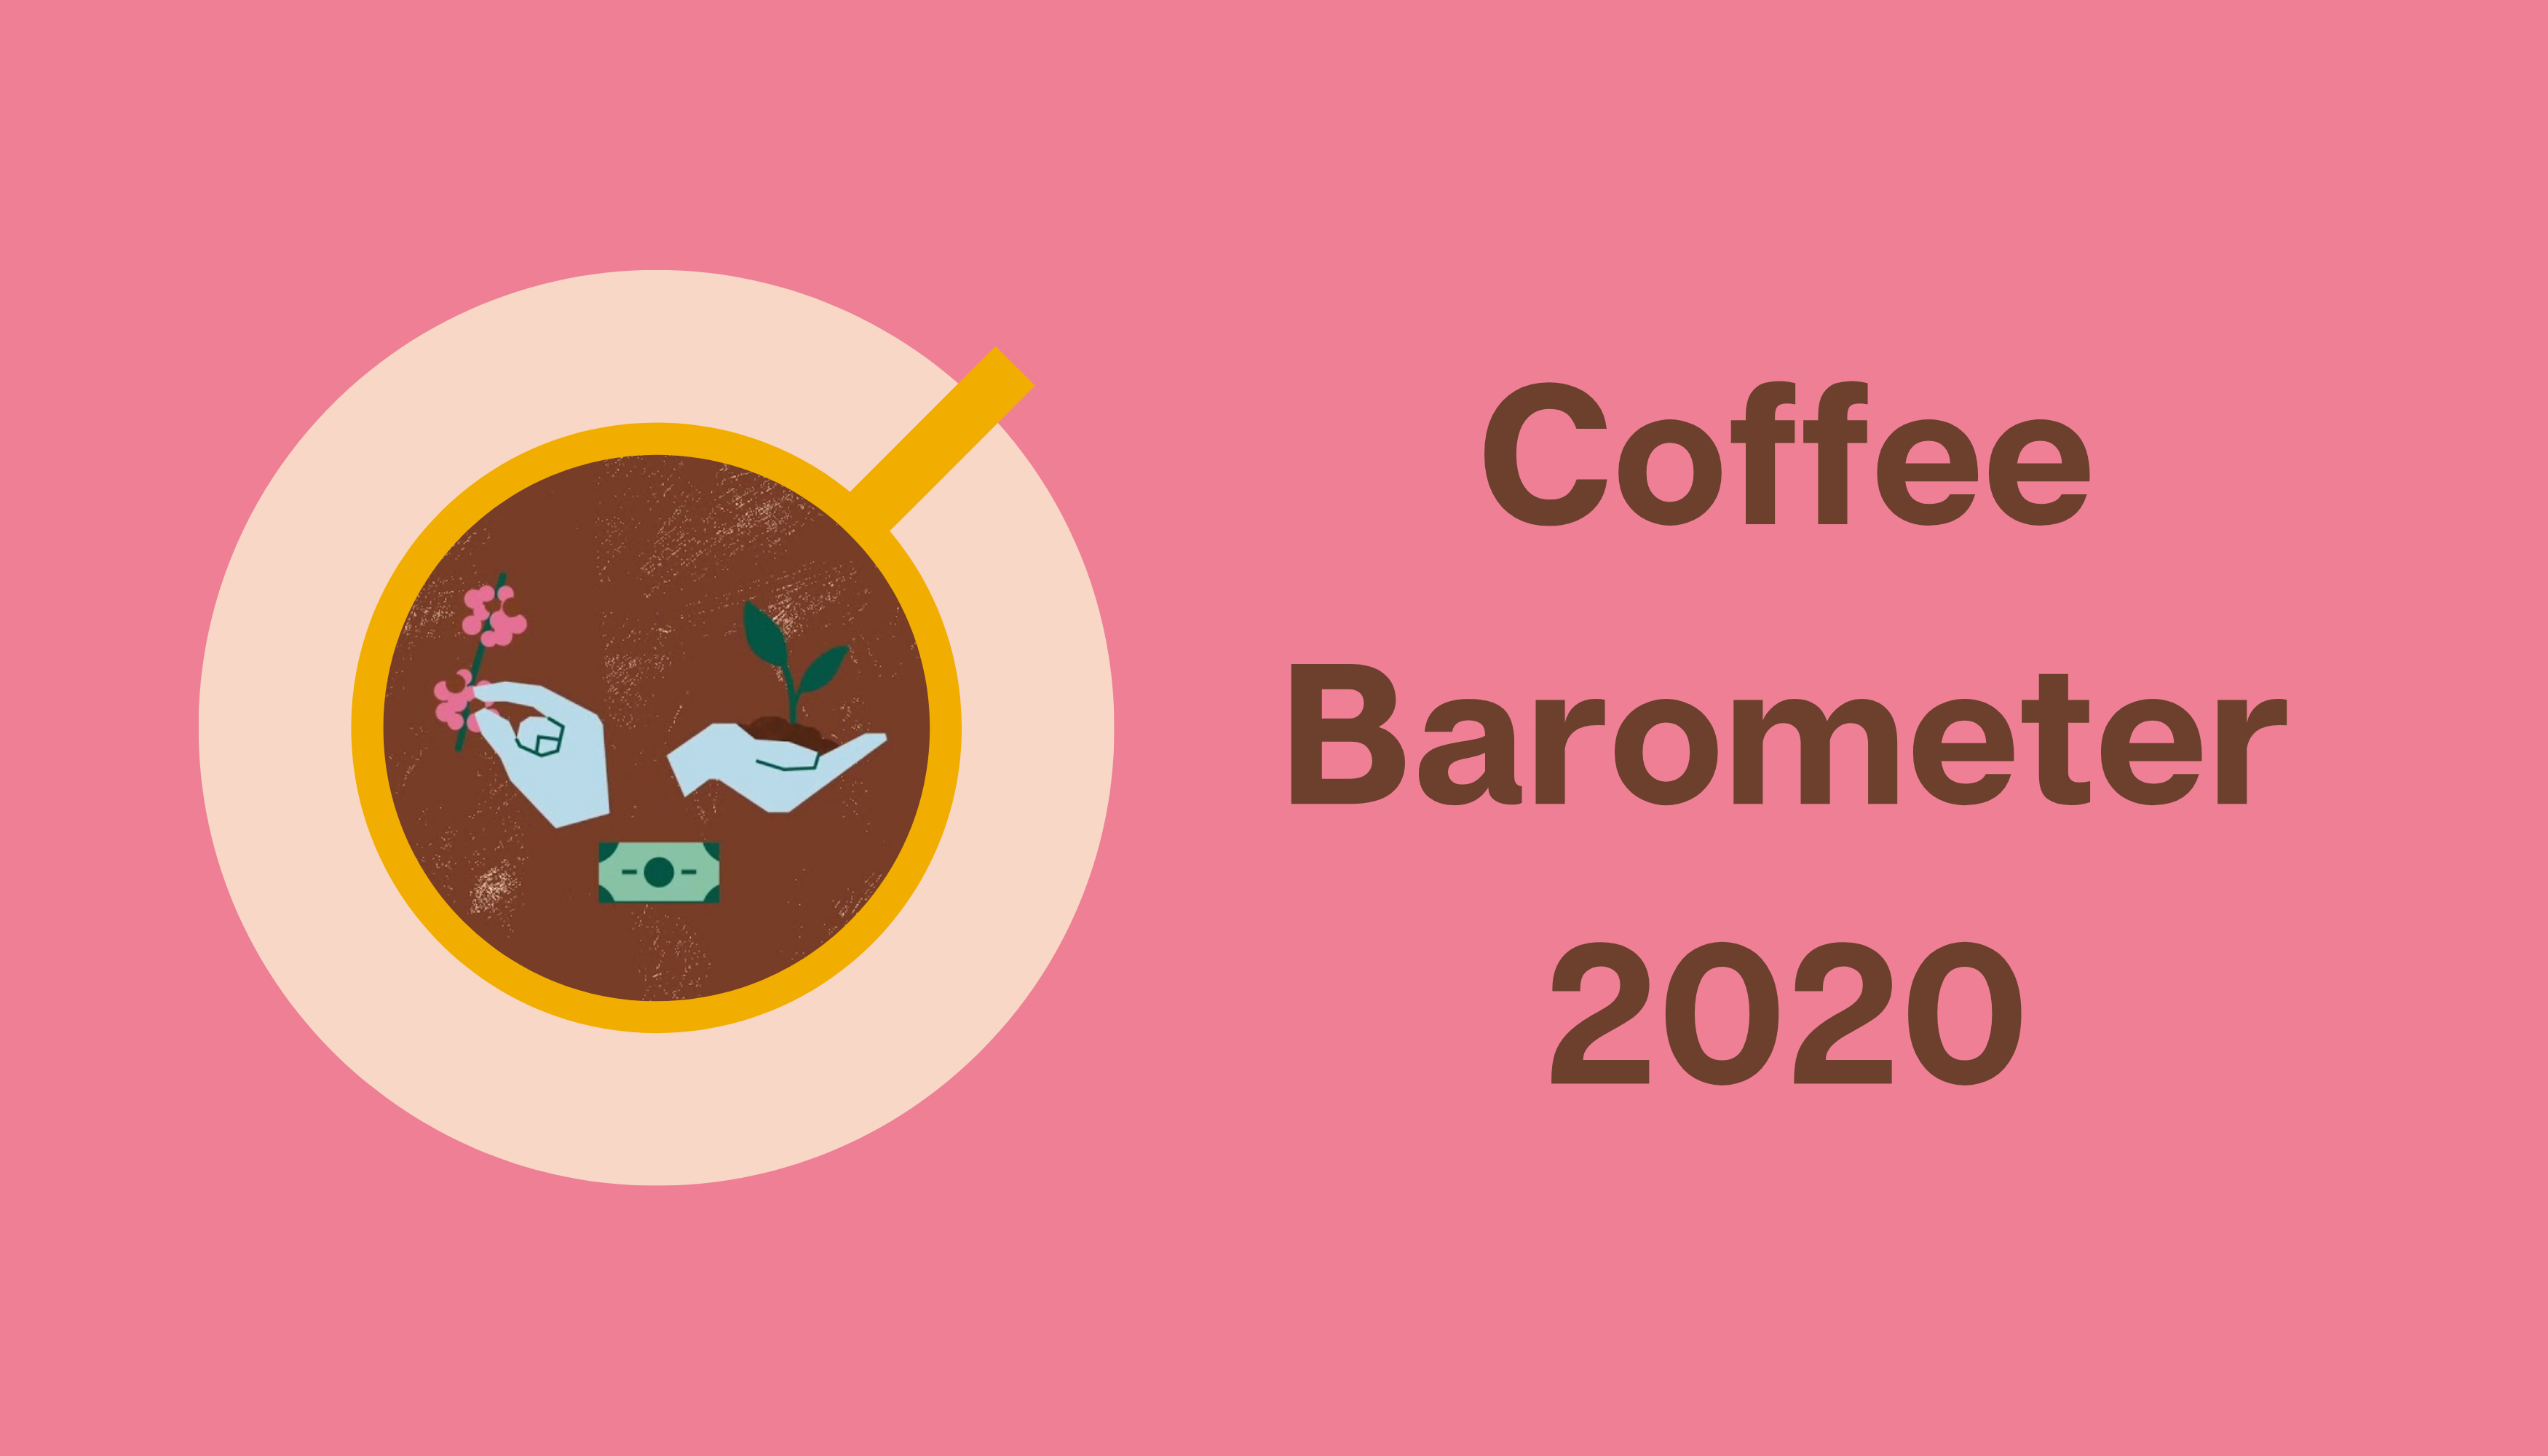 The Coffee Barometer 2020 Report:  Little evidence of sustainability impact